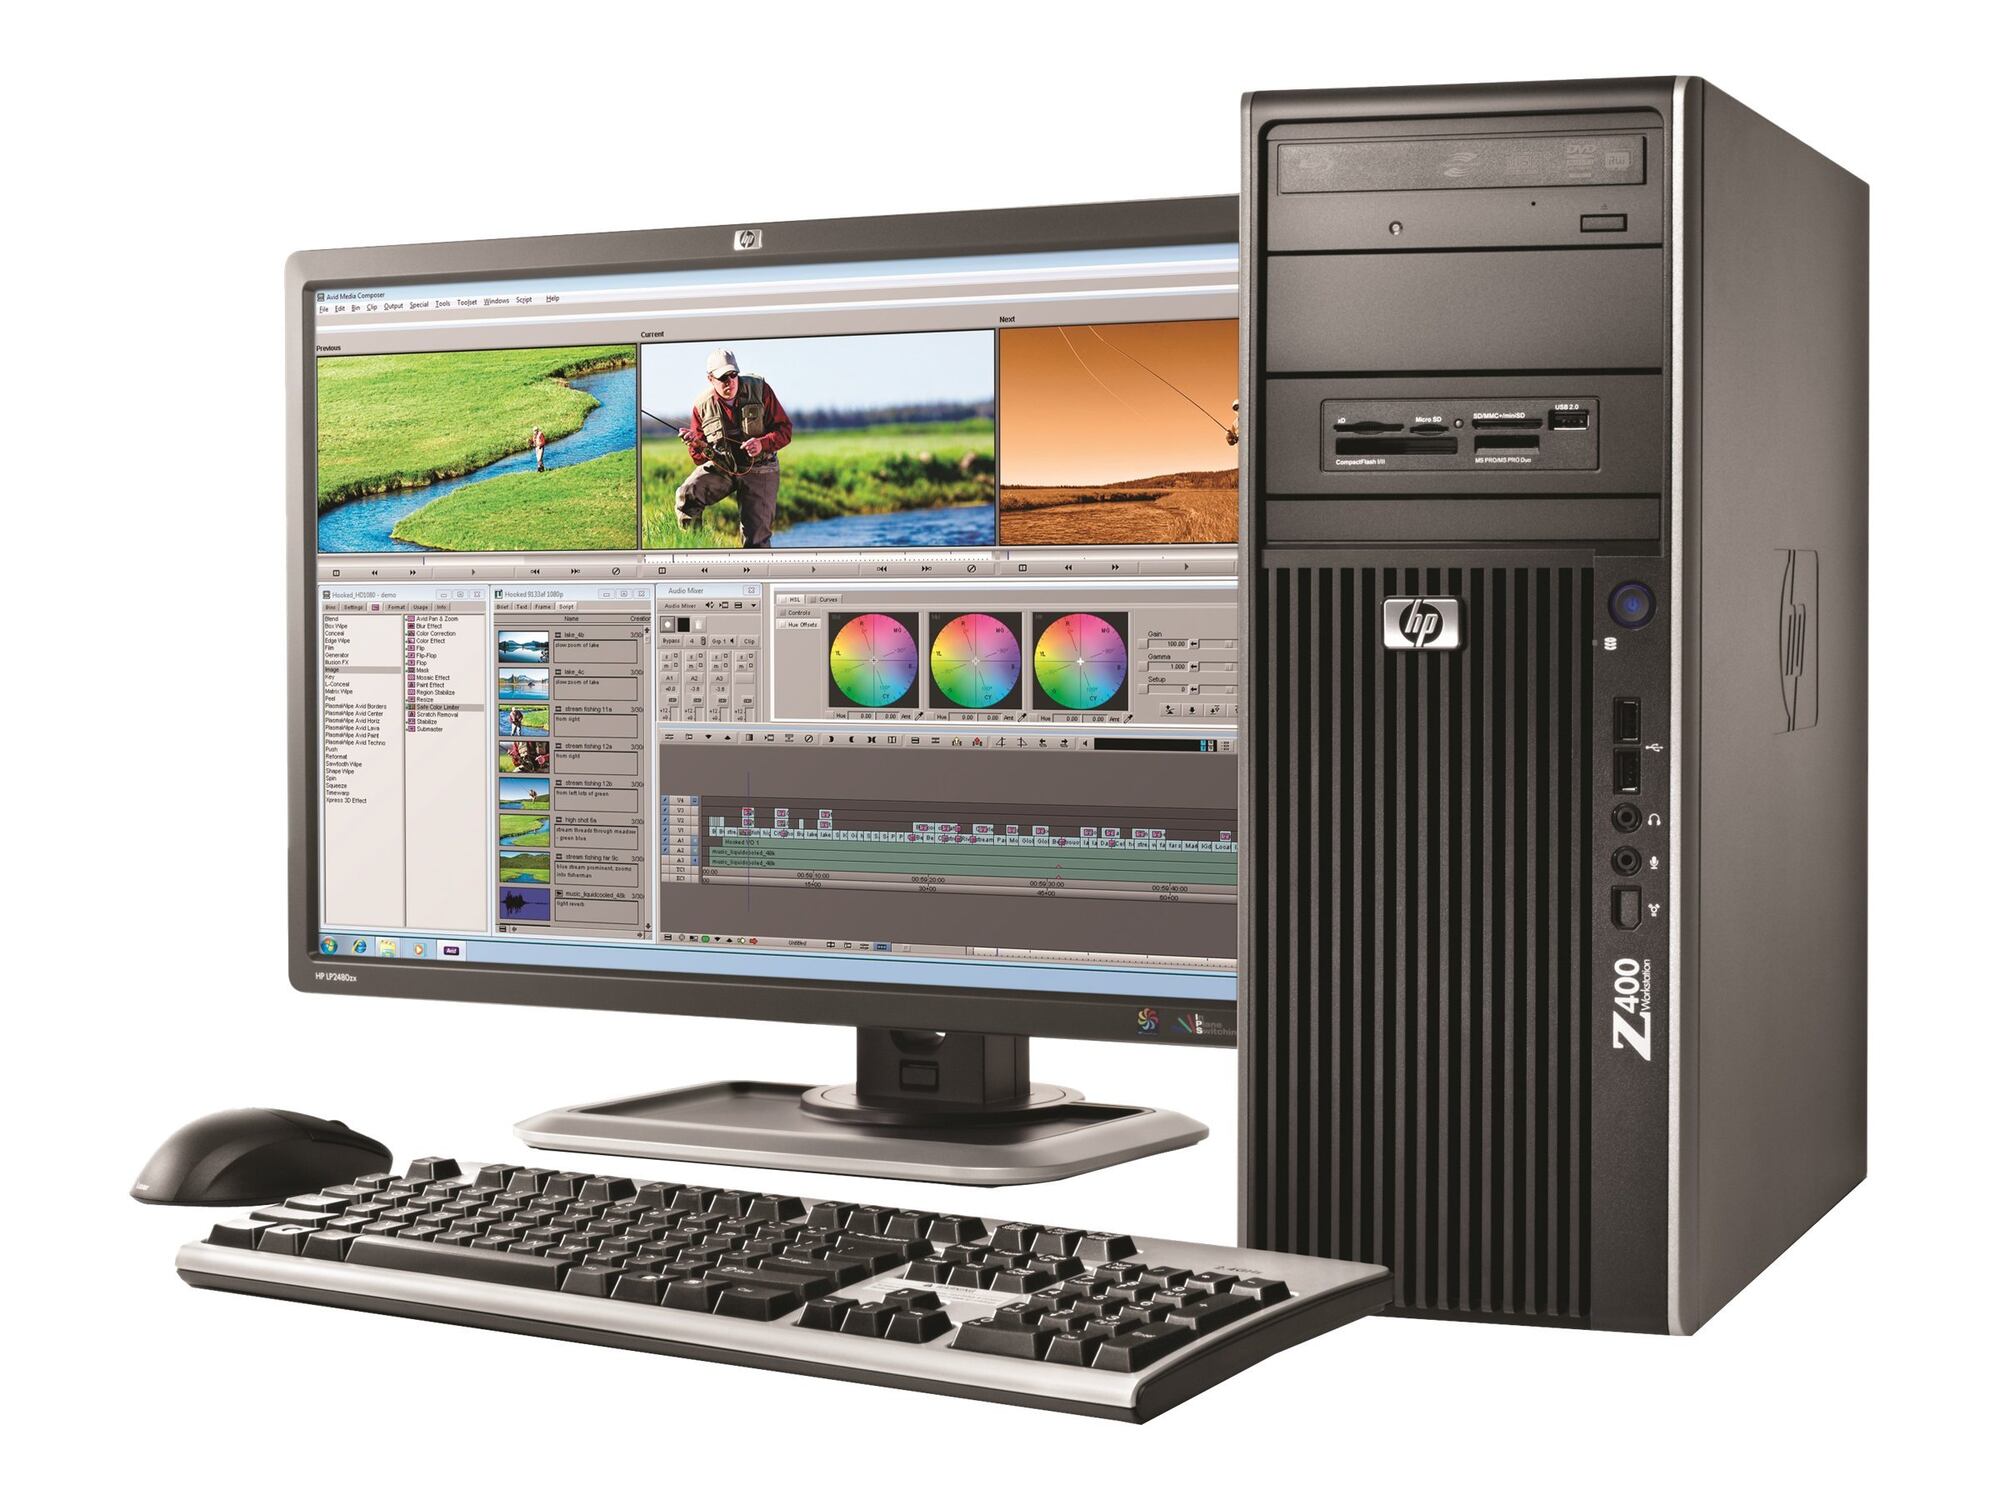 Why Are So Many HP Z400 Workstation Computers Refurbished